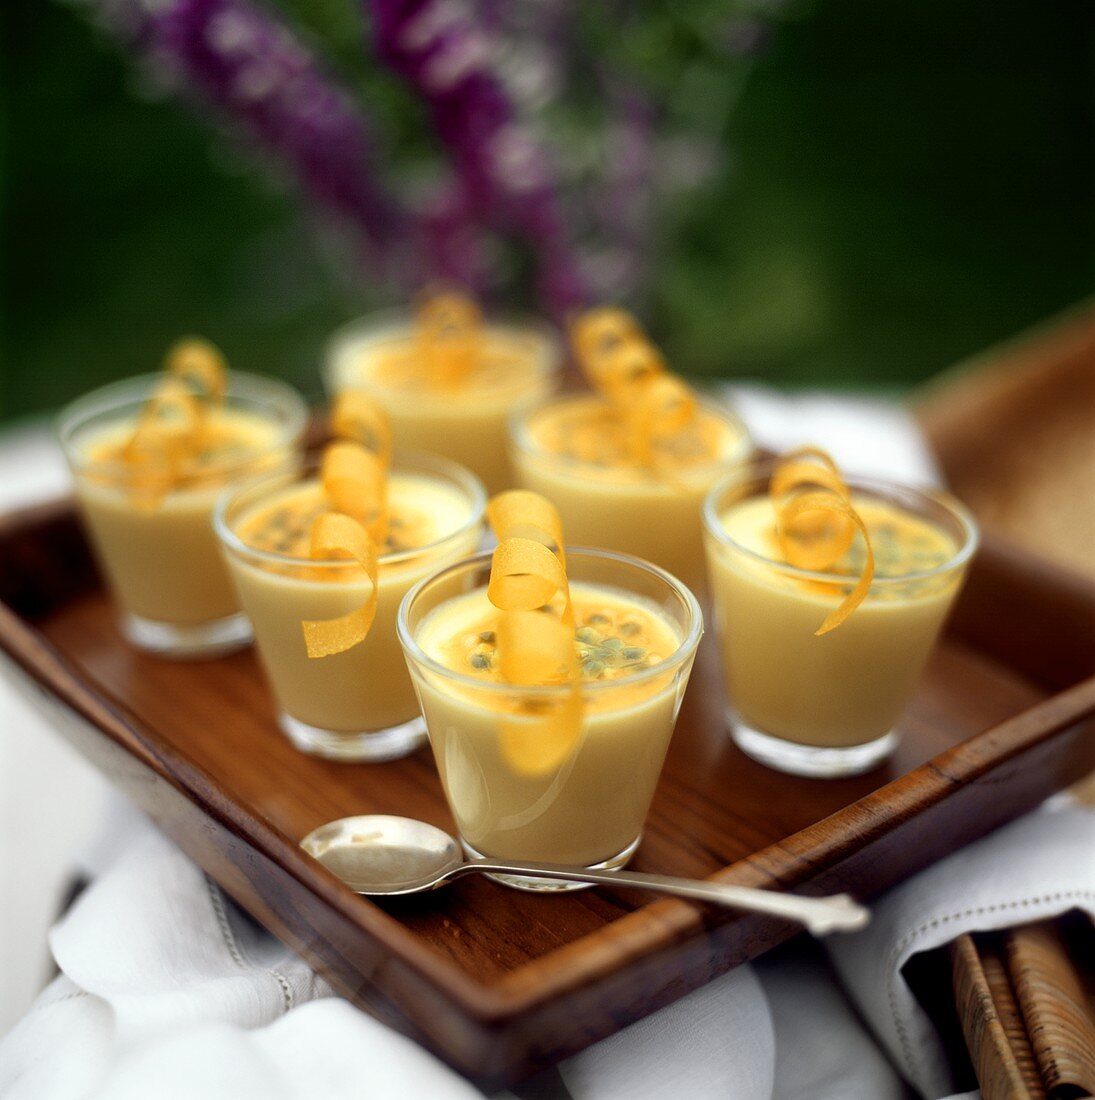 Passion fruit mousse in glasses on a tray